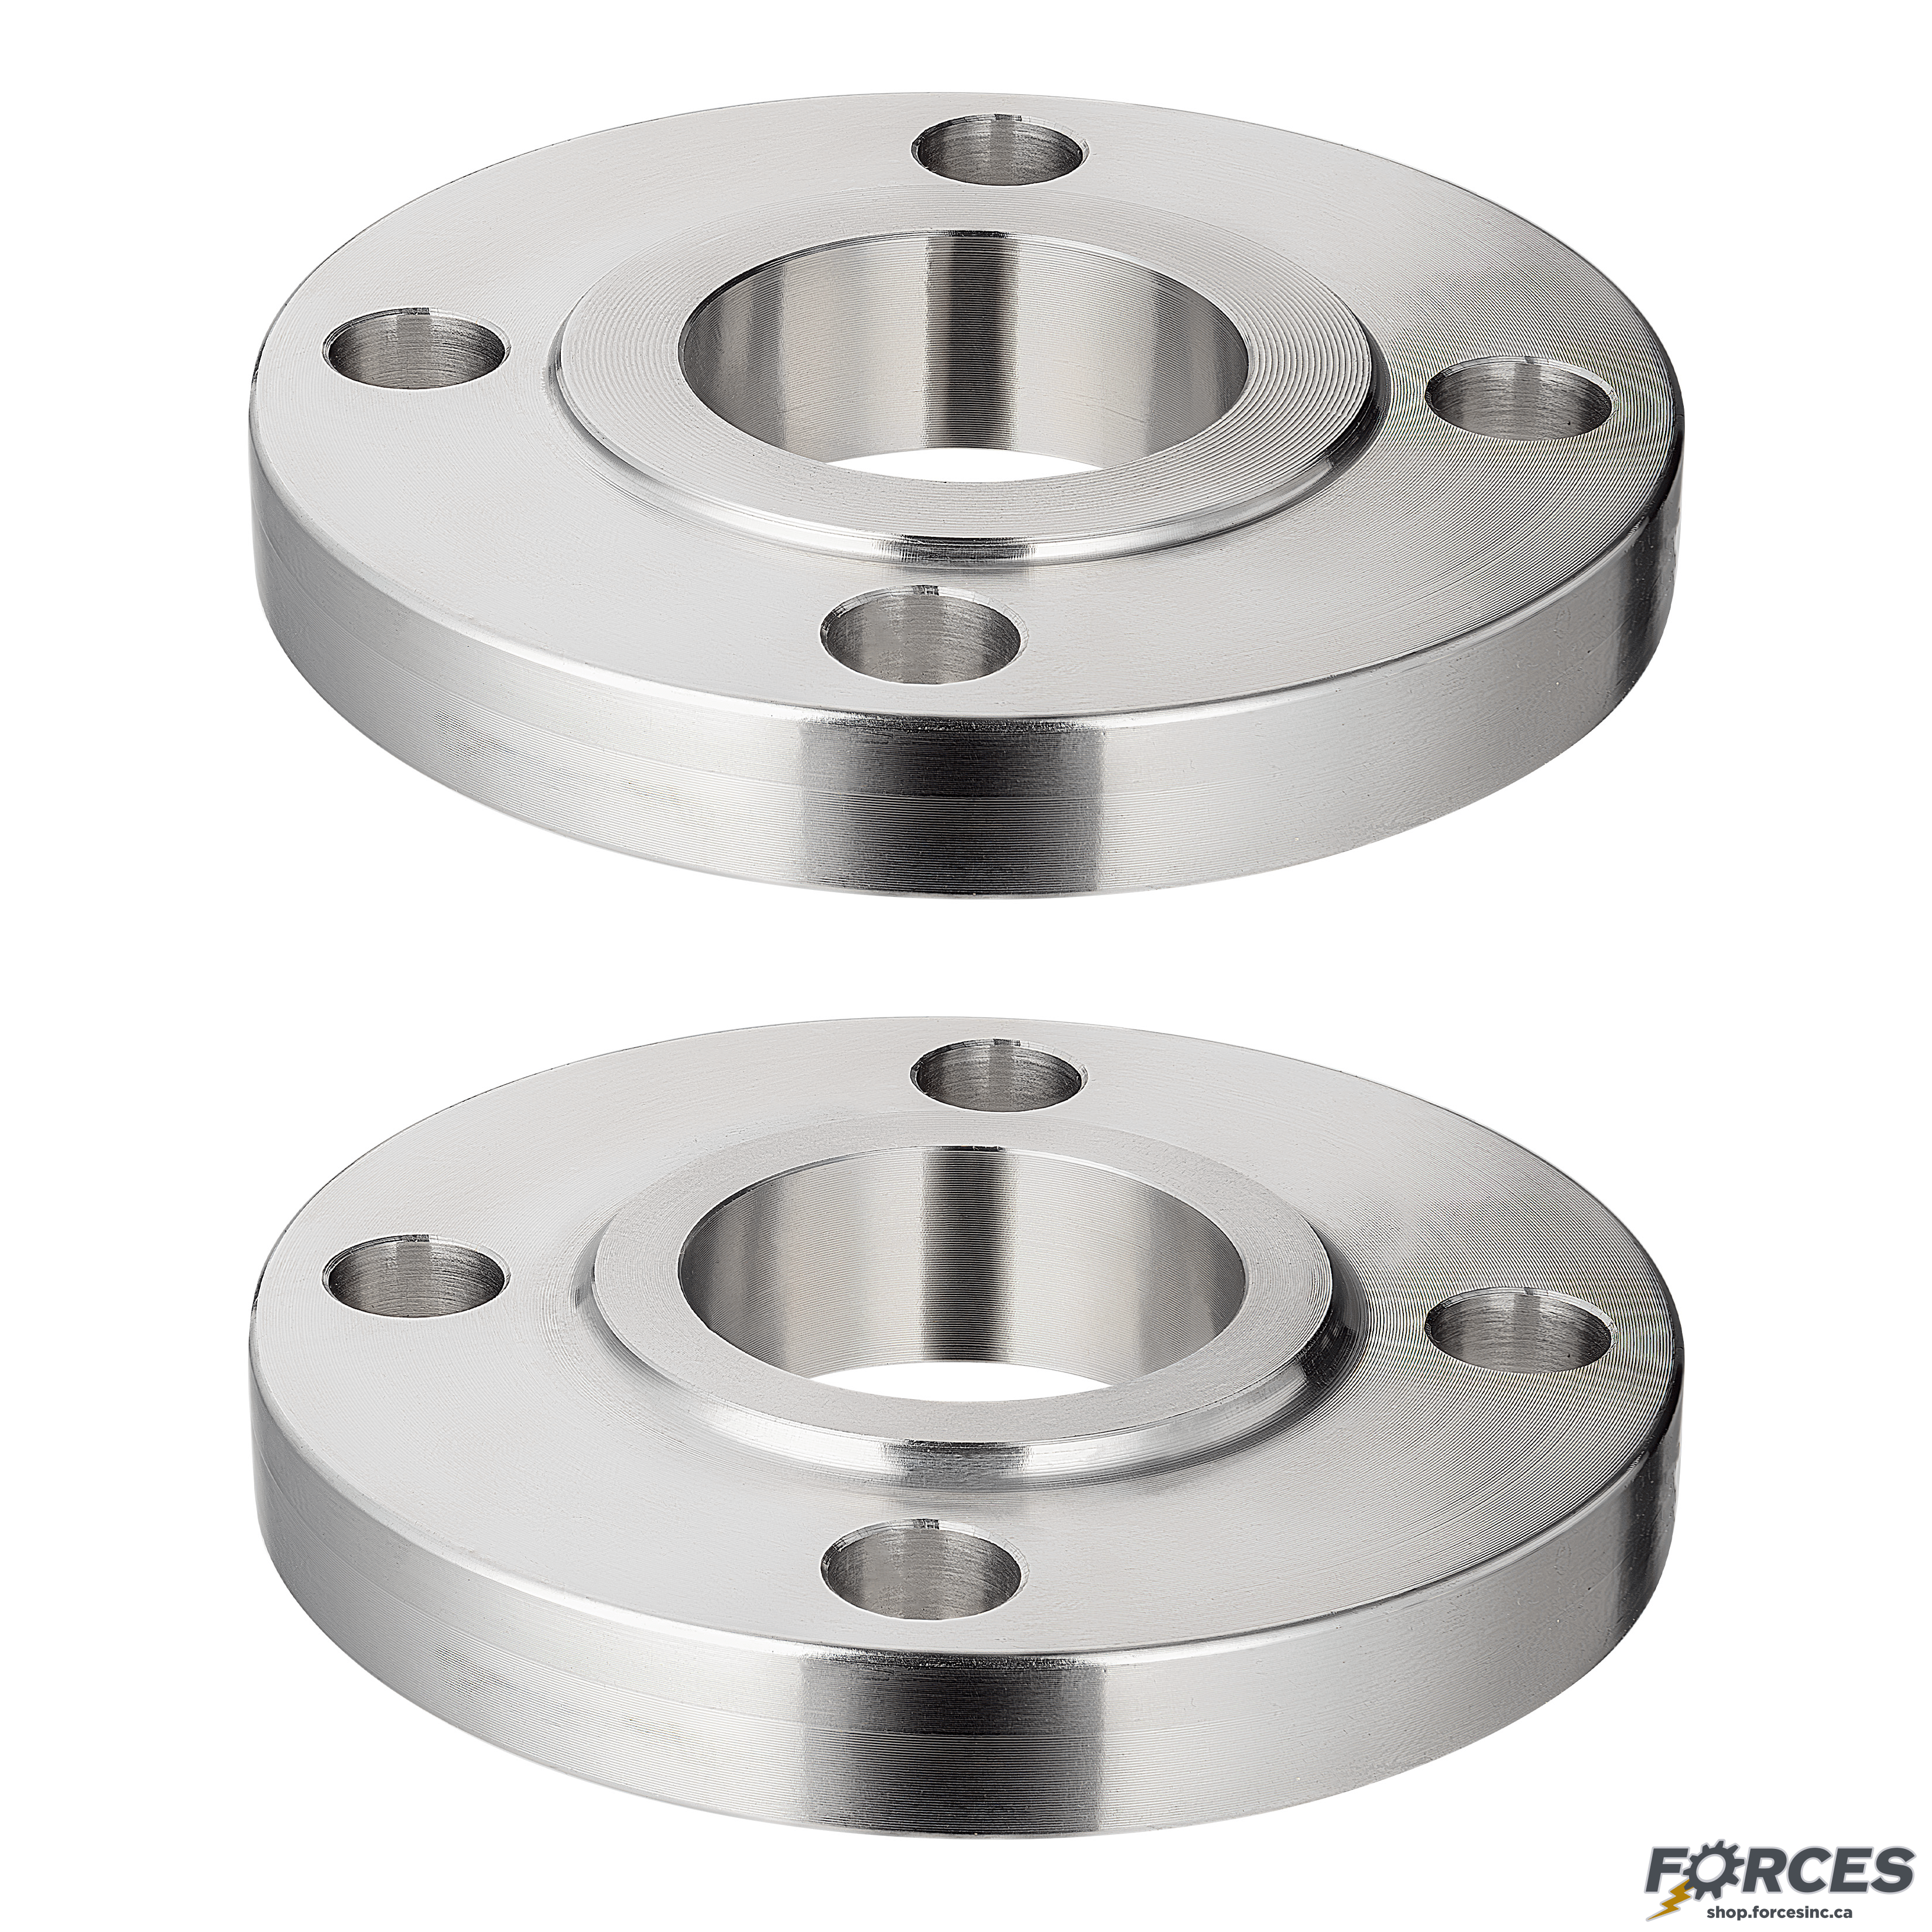 1/2" Slip-On Flange Class #150 - Stainless Steel 304 - Forces Inc